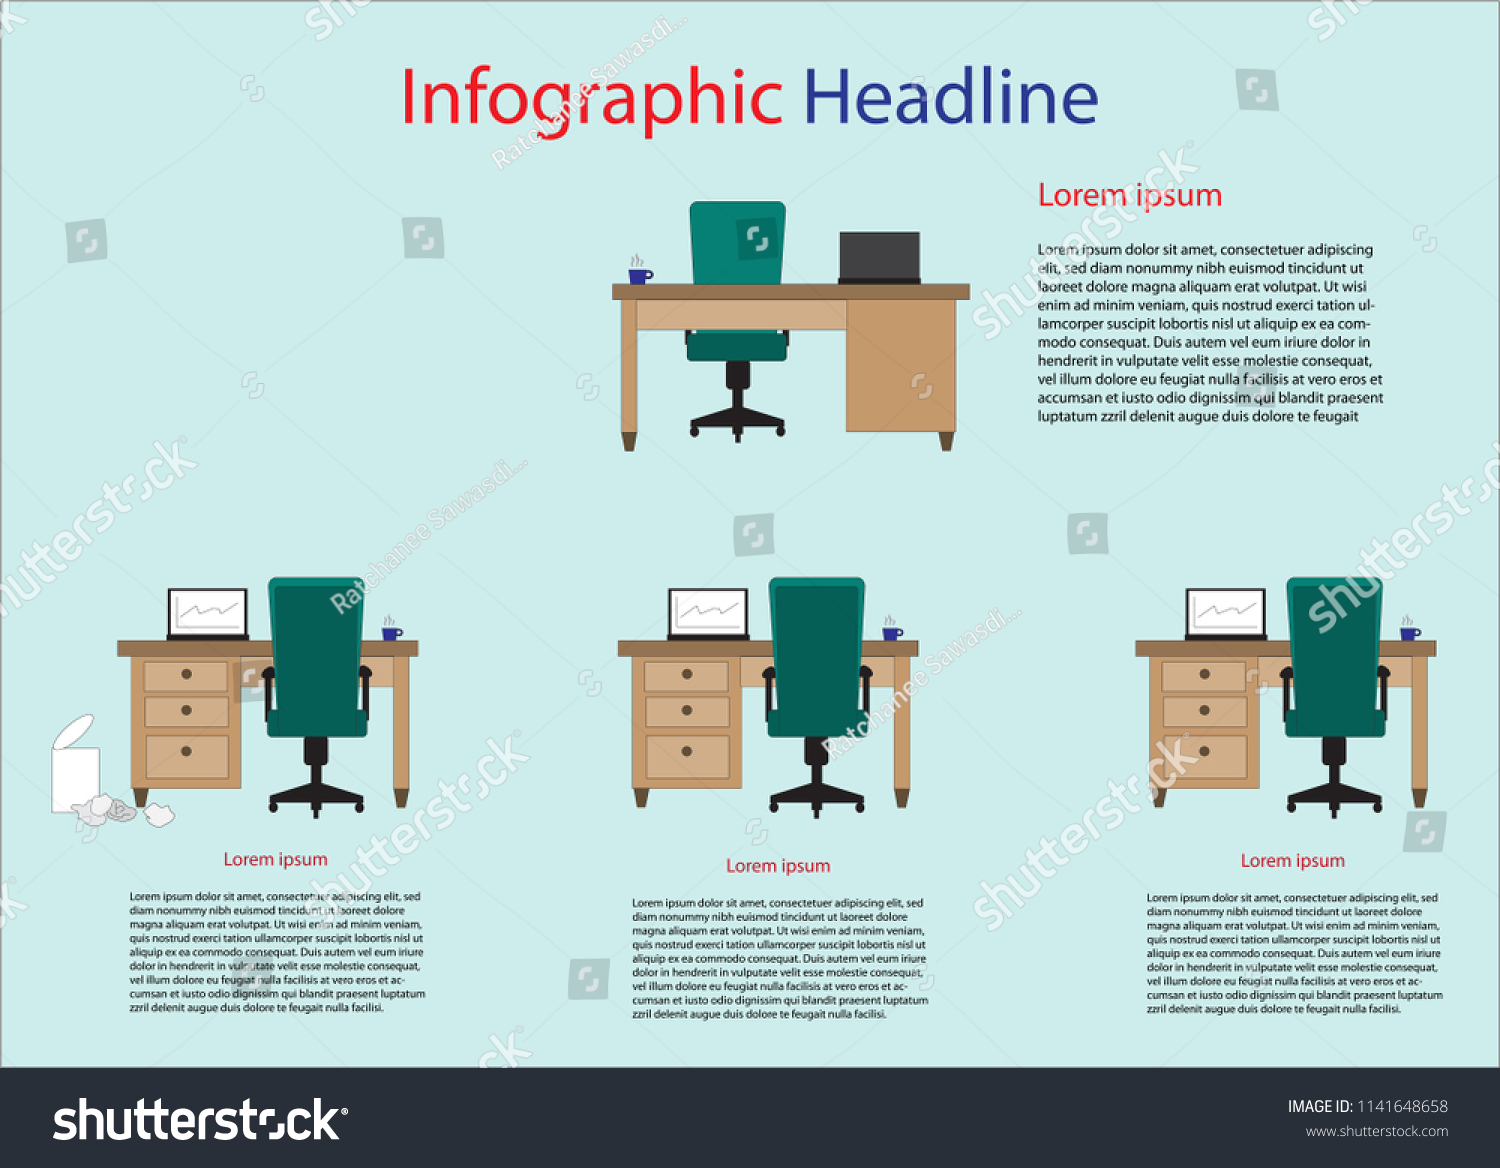 Infographic Image Show Desk Position Office Stock Vector Royalty